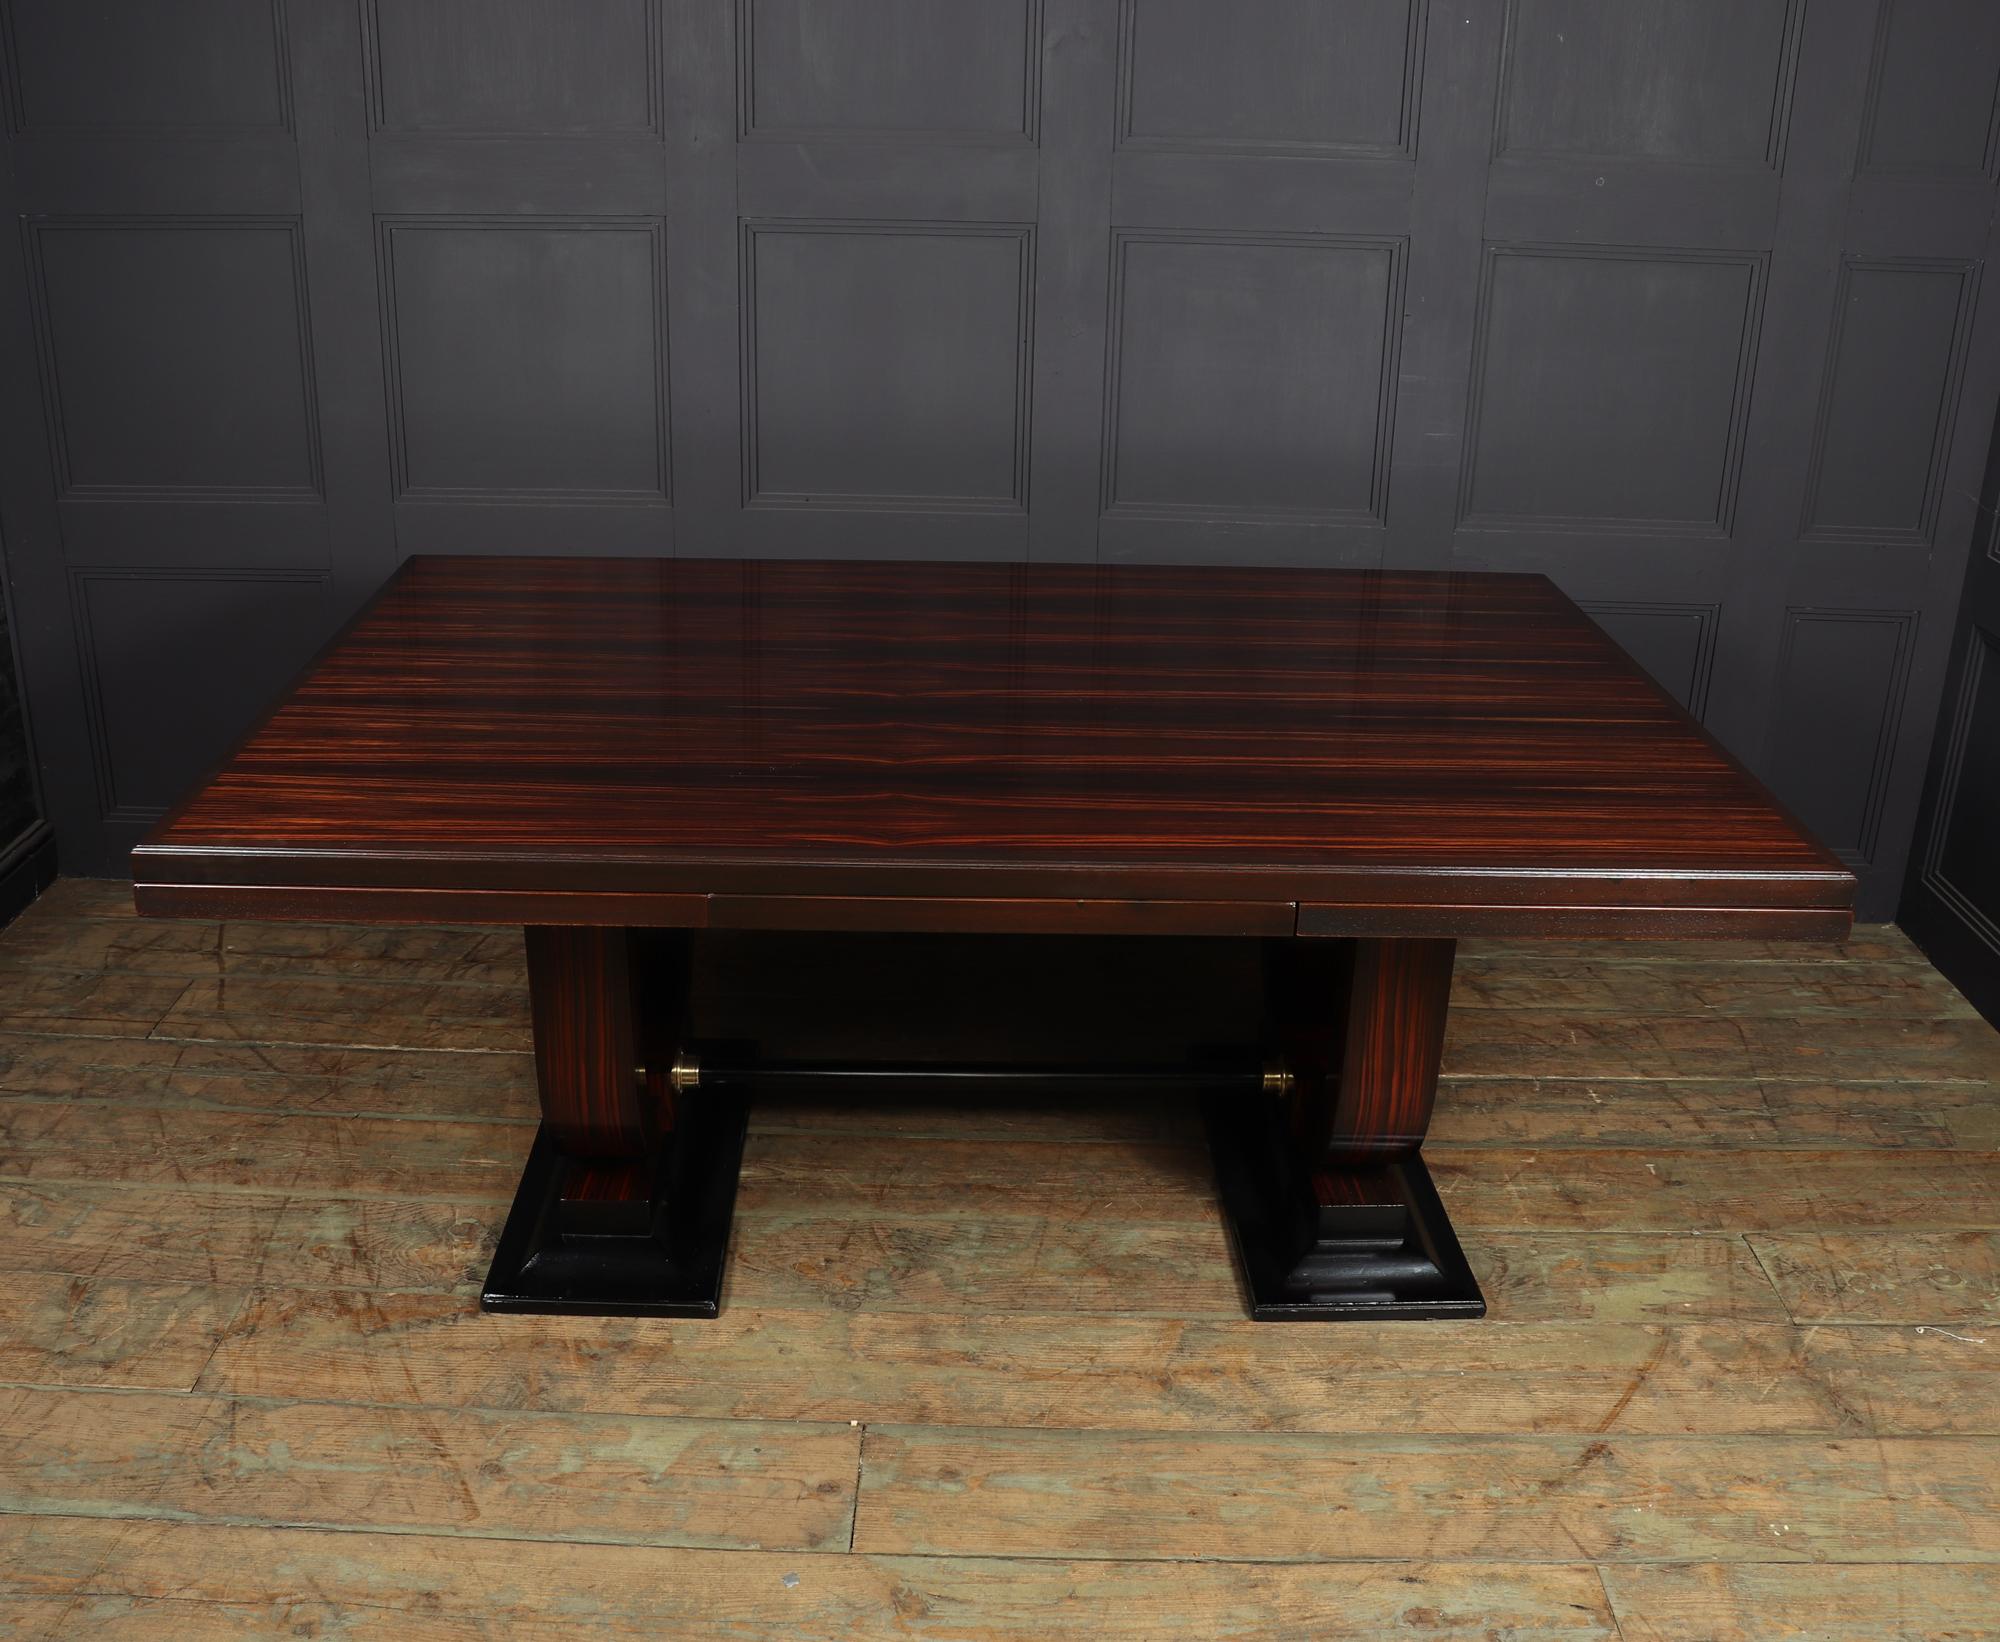 A very large dining table produced in Paris in c1925 by Leon Bernheim solid oak framed with Macassar ebony veneers, this table very much in the Manner of Emile-Jacques Ruhlmann with its double u base, extendable leaves and its exceptional